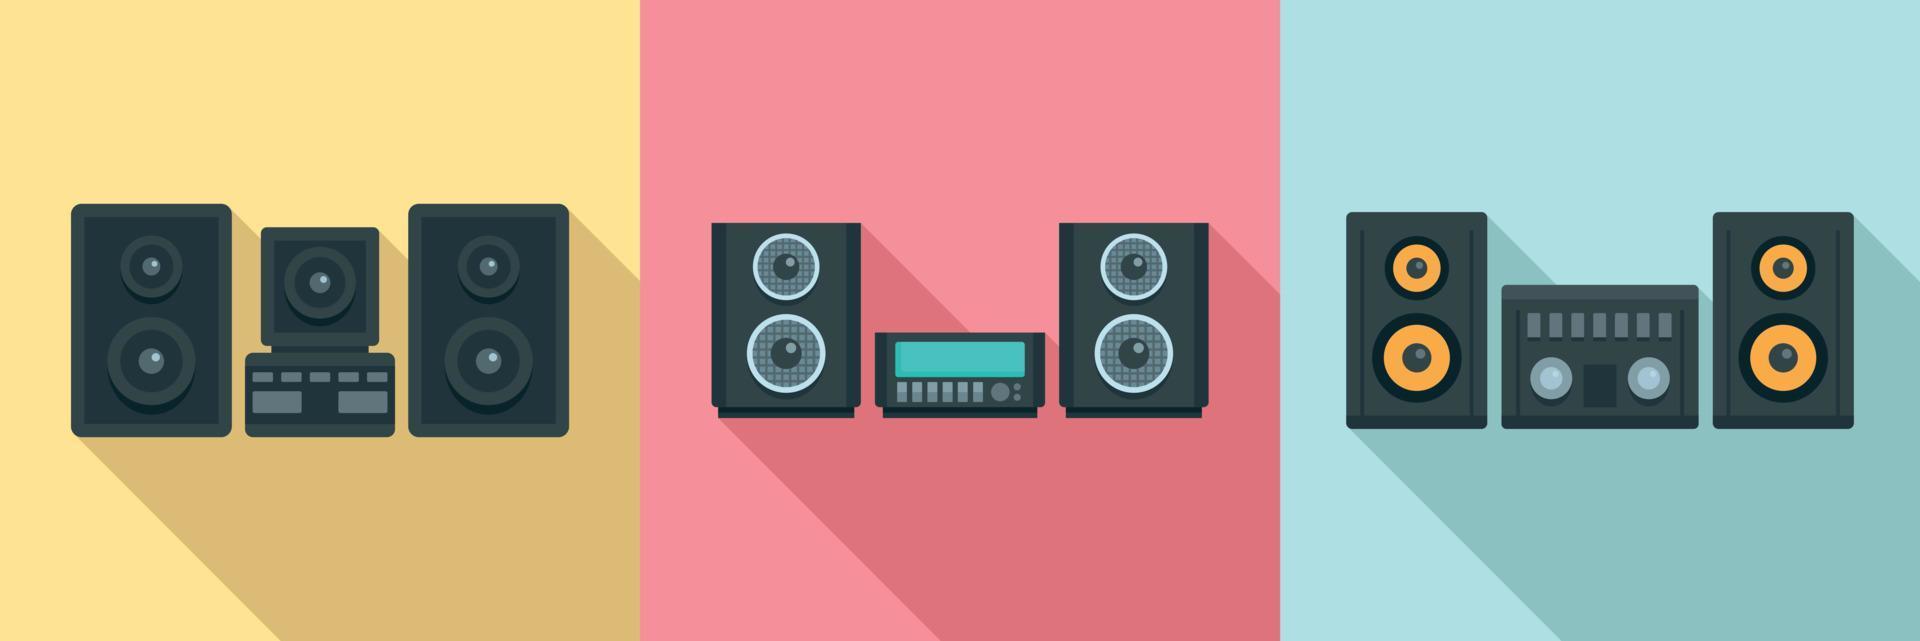 Stereo system icons set, flat style vector